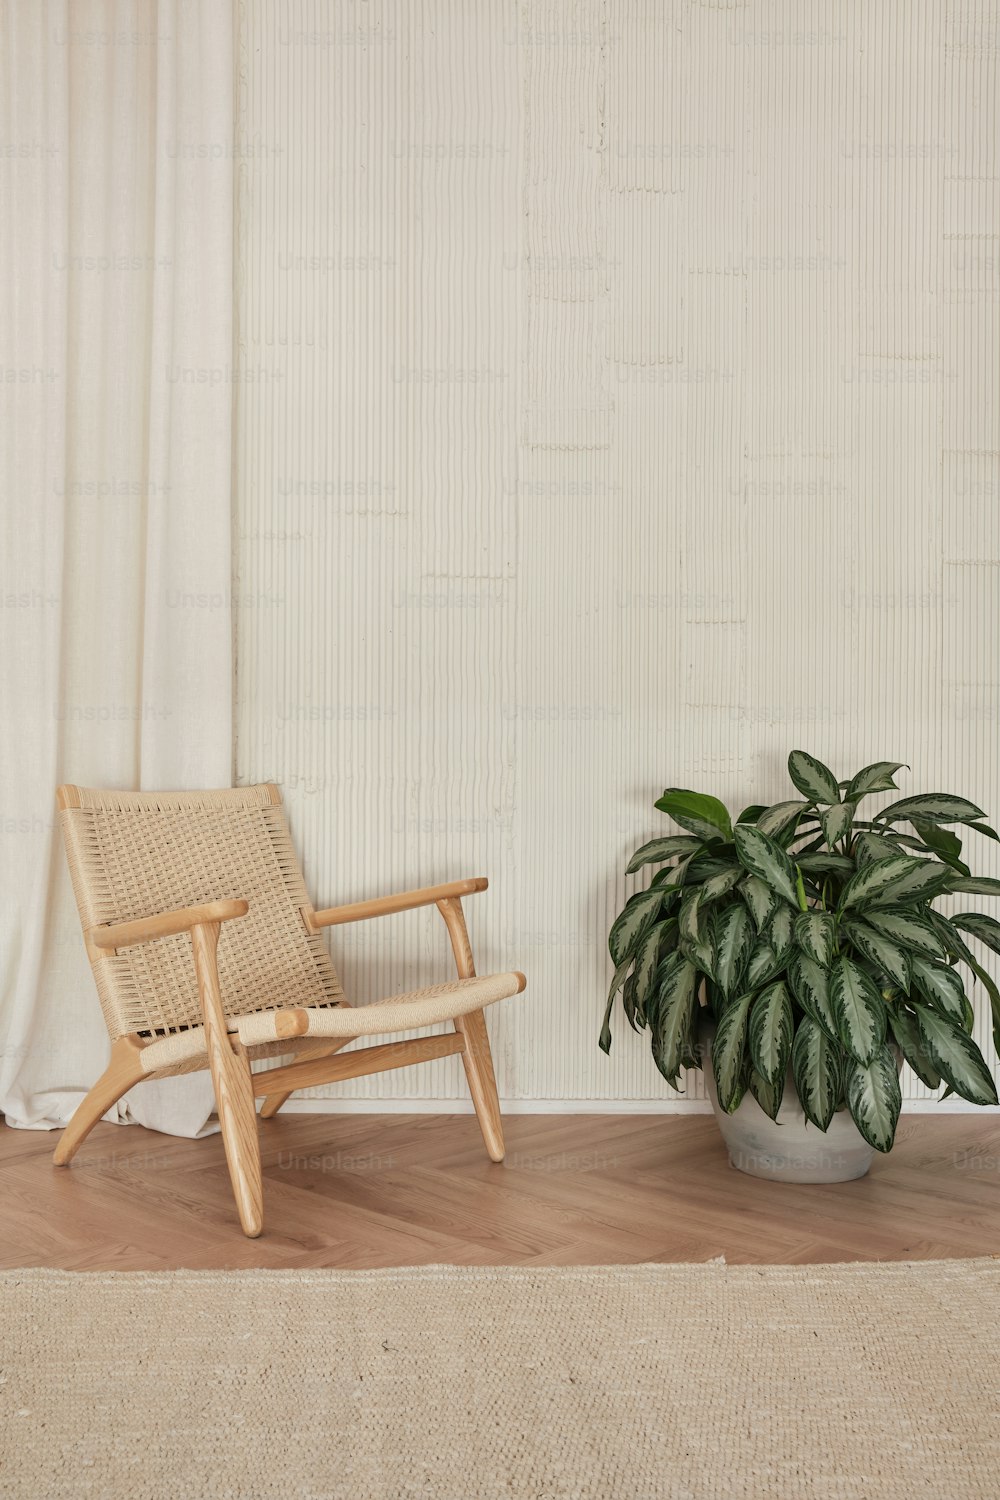 a chair next to a potted plant on a wooden floor